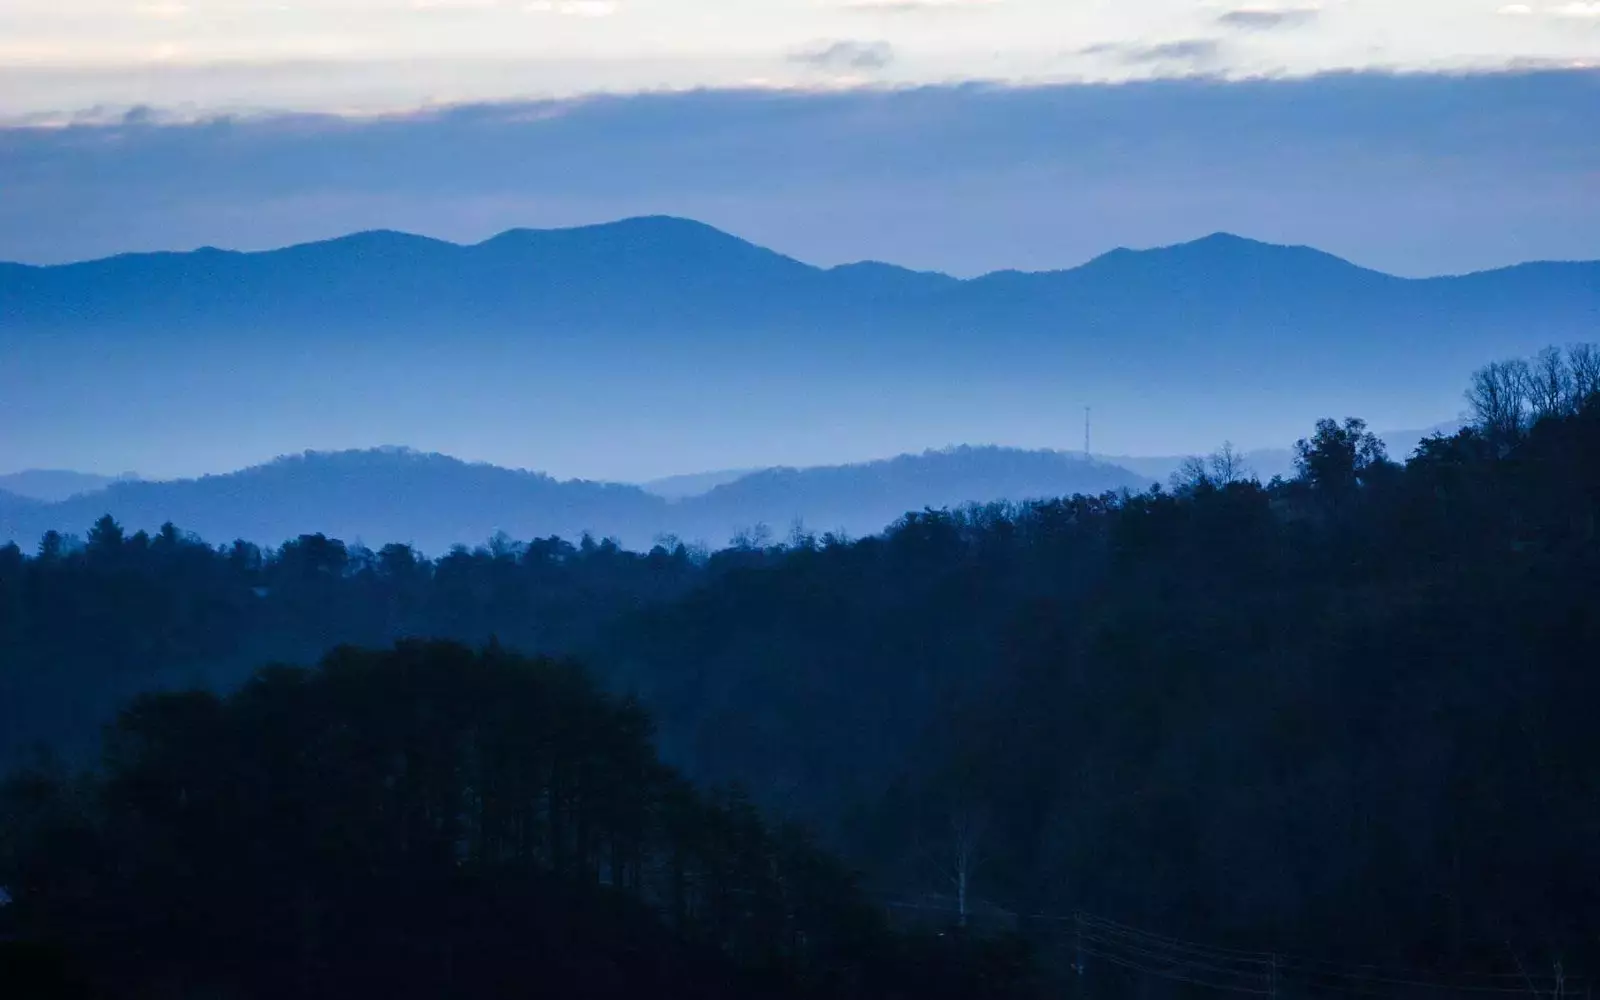 The Great Smoky Mountains with a blue haze.